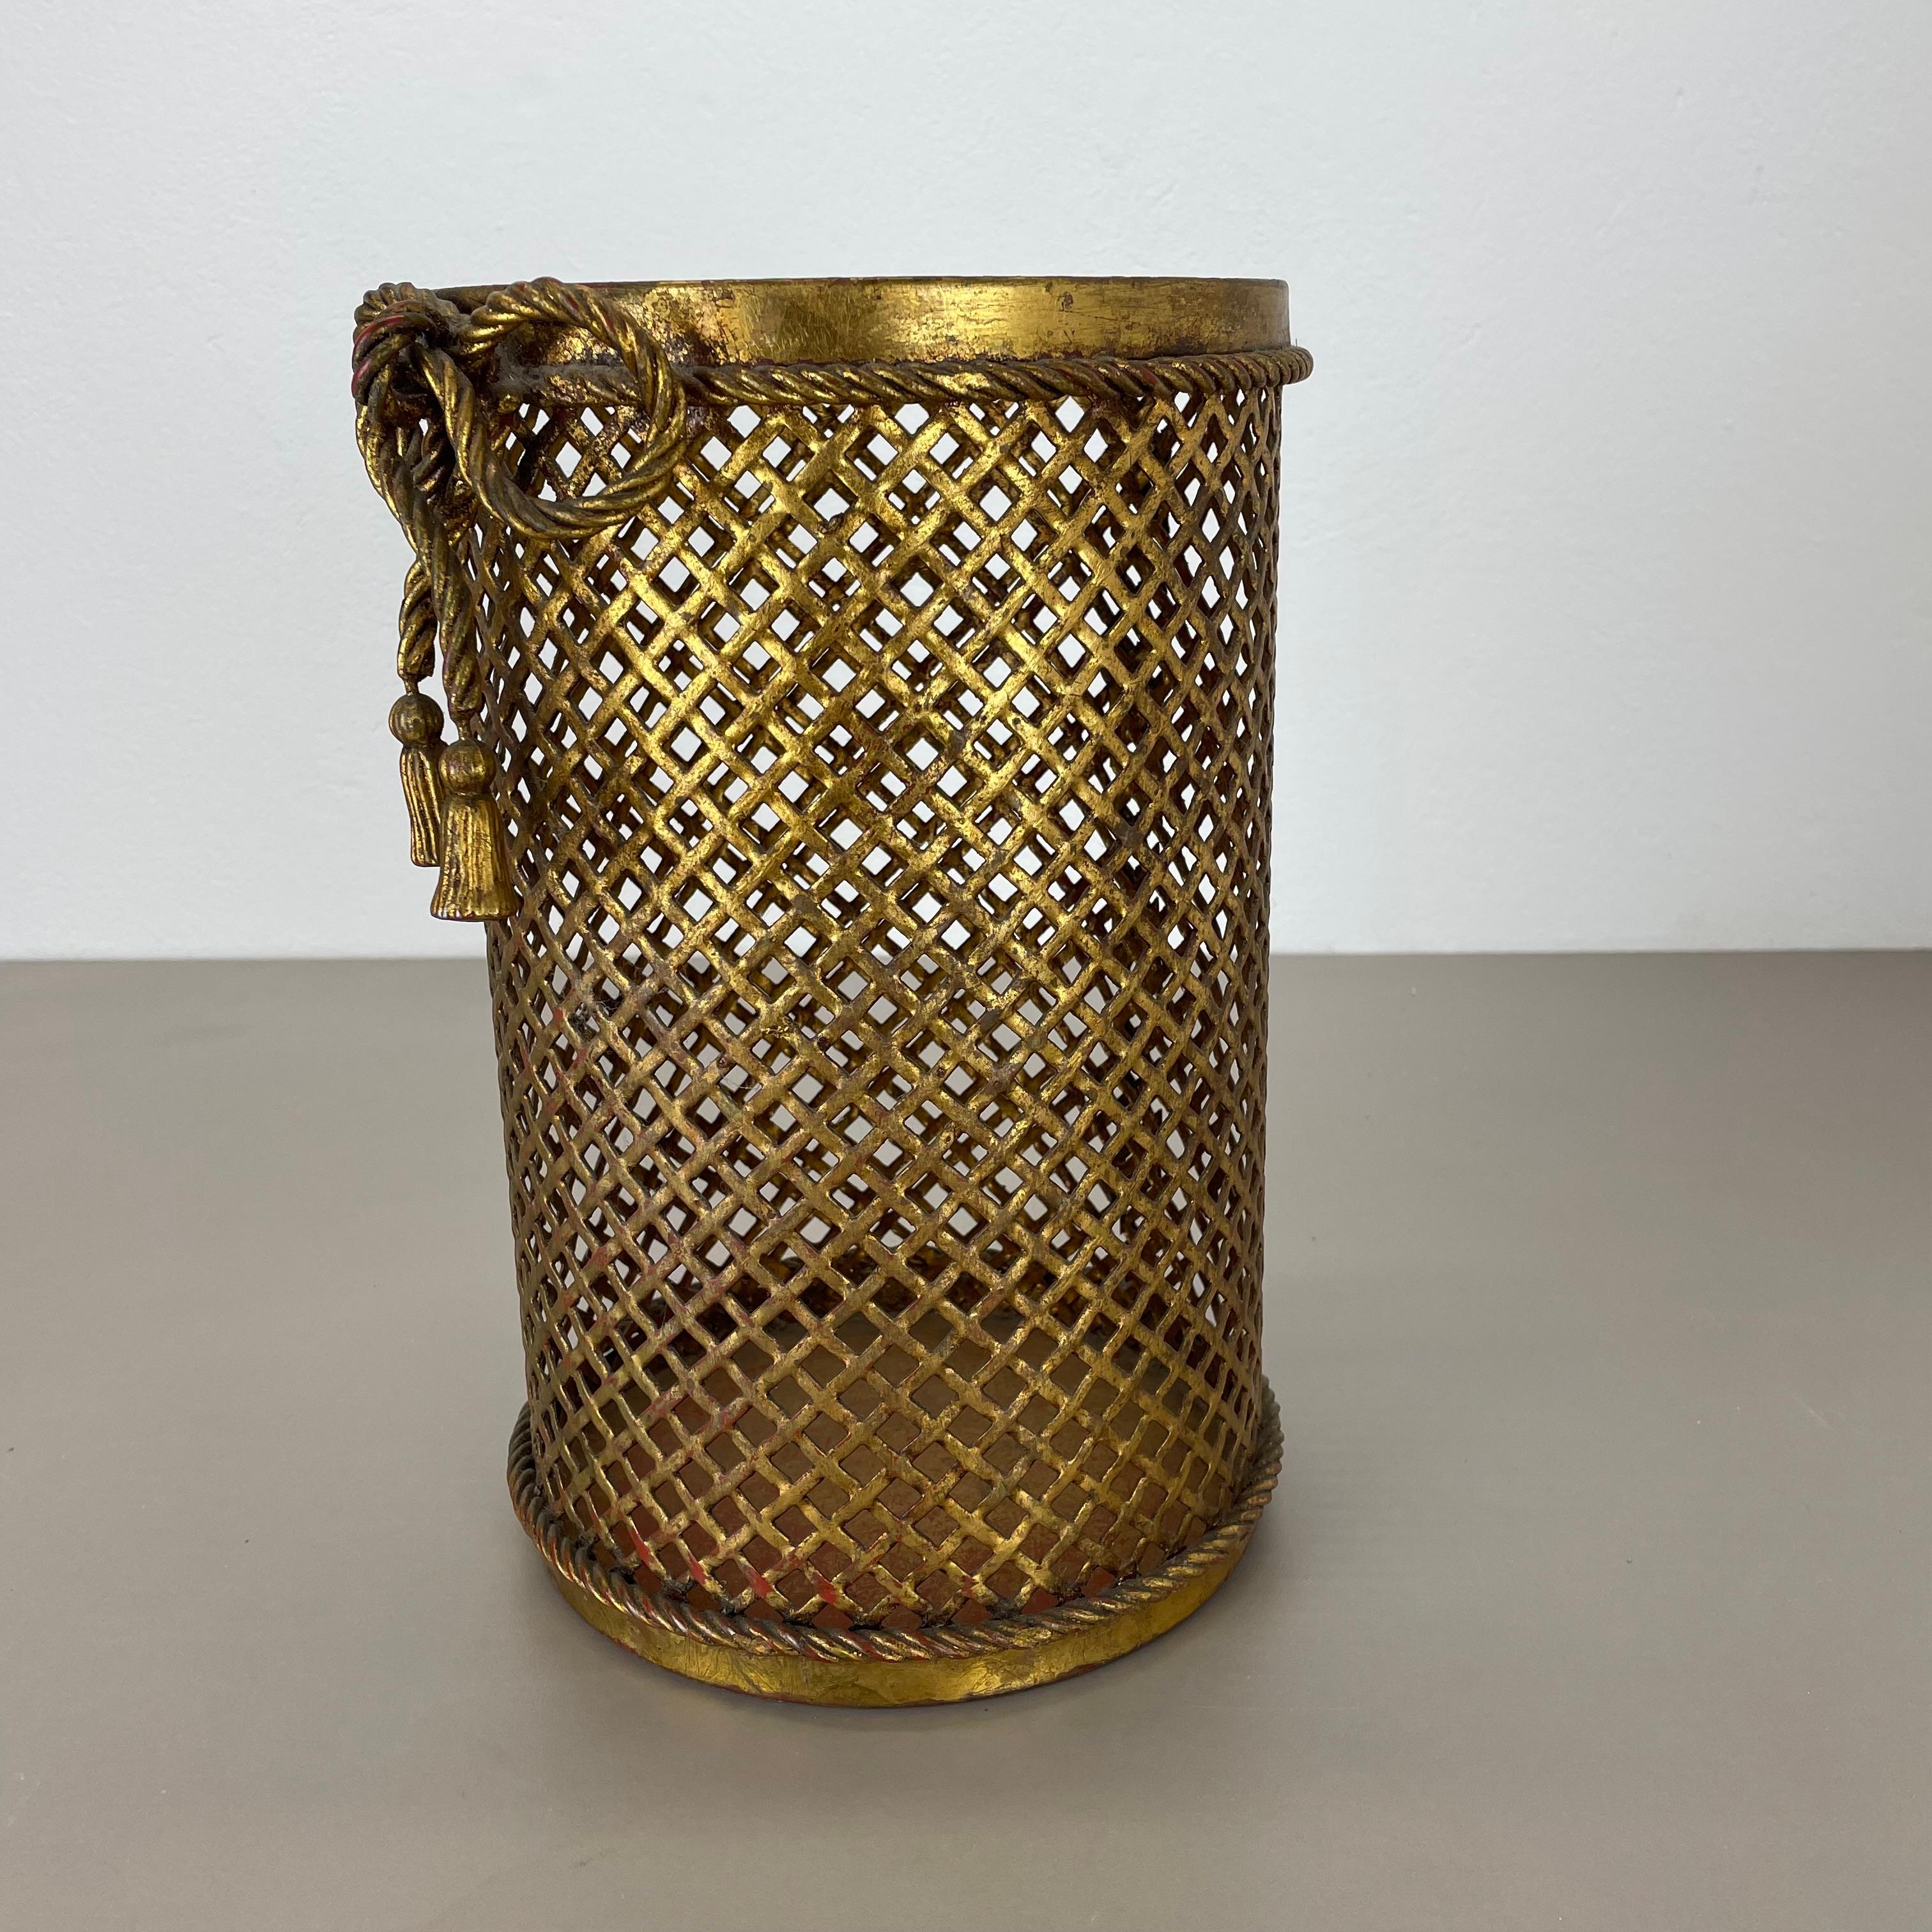 Mid-20th Century Hollywood Regency Gilded Waste Paper Basket by Li Puma, Firenze, Italy, 1950s For Sale